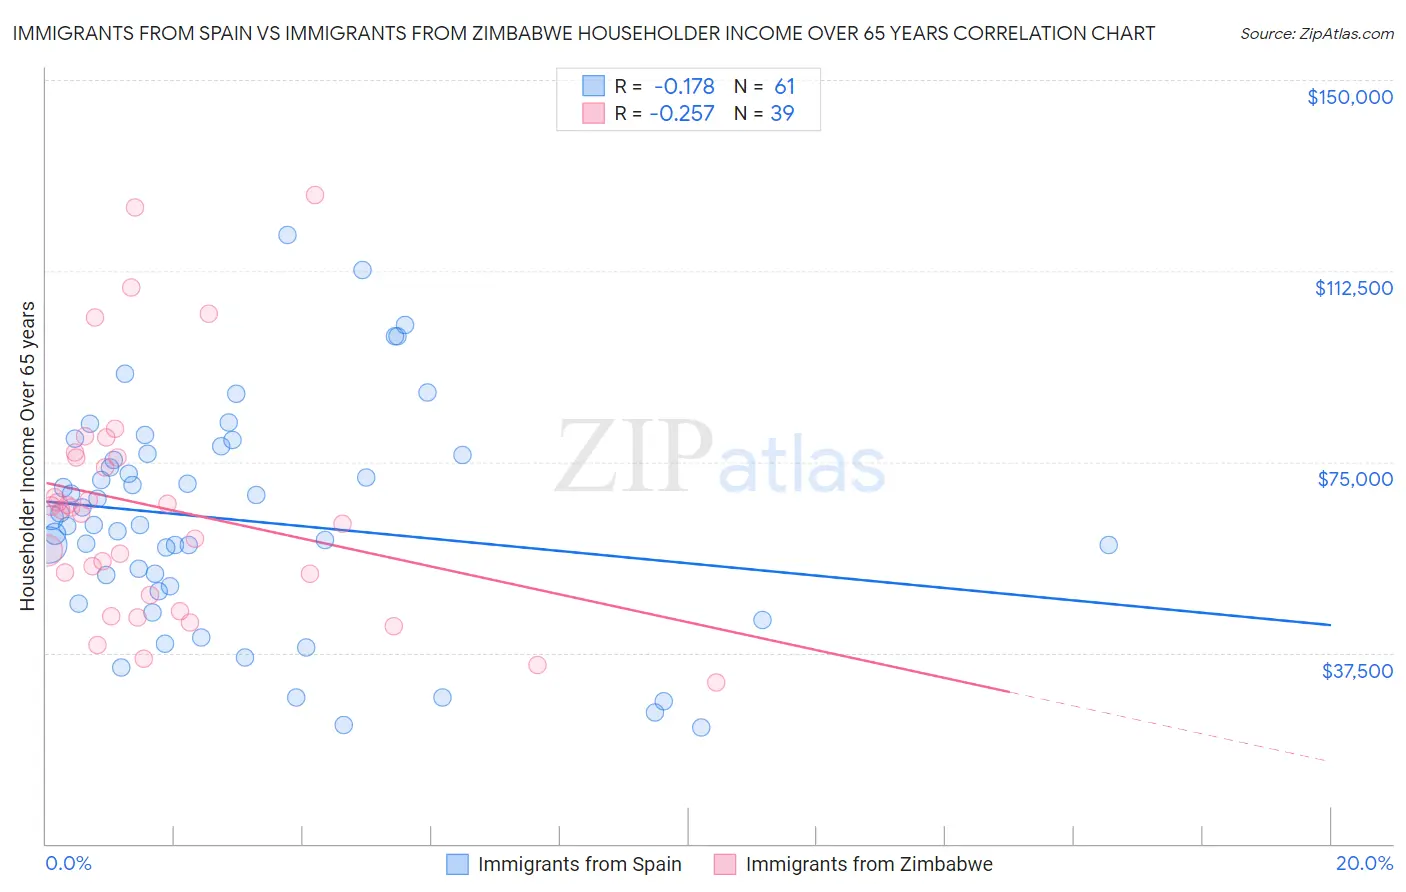 Immigrants from Spain vs Immigrants from Zimbabwe Householder Income Over 65 years